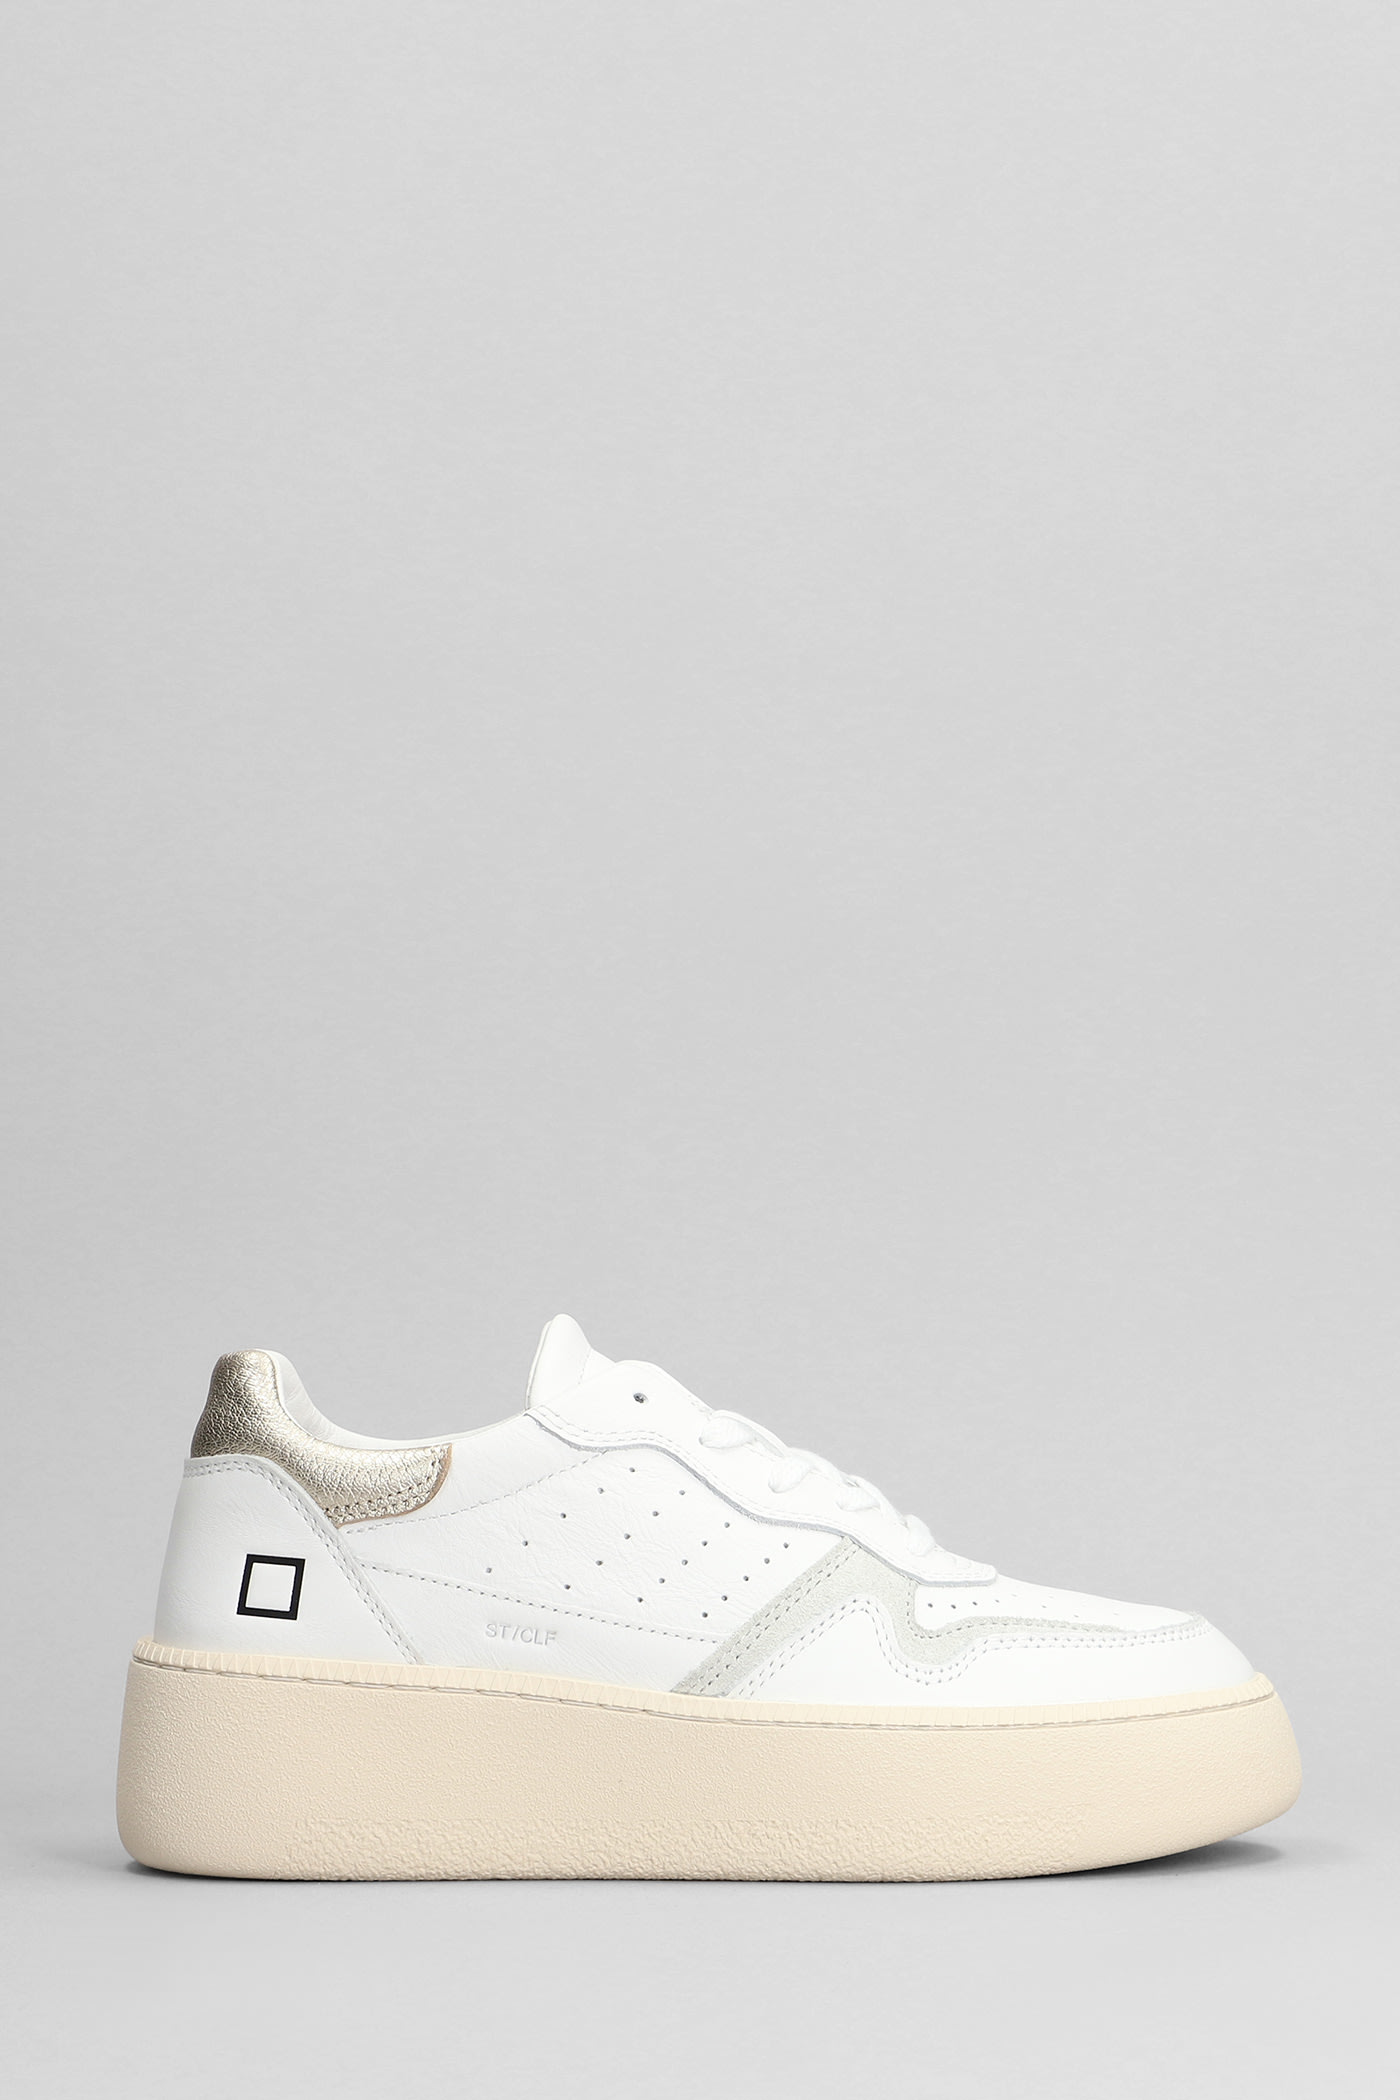 D.a.t.e. Step Sneakers In White Leather In Bianco/platino